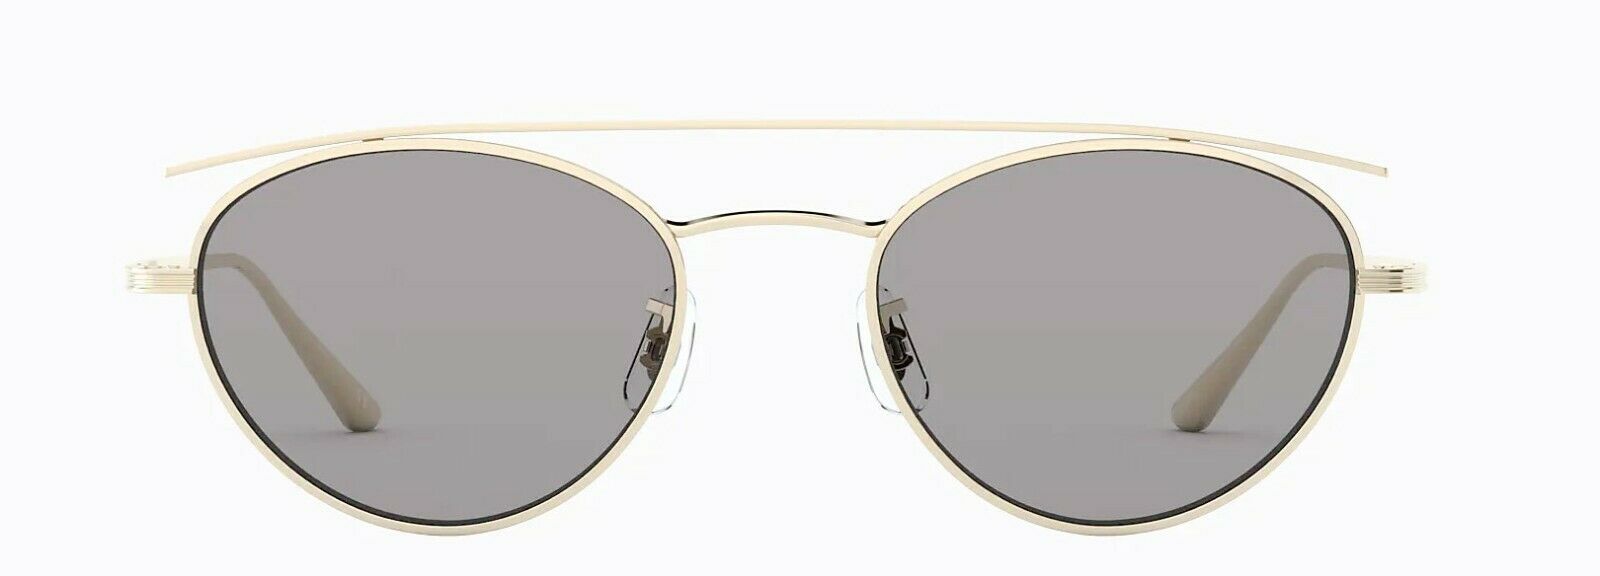 Oliver Peoples Sunglasses 1258ST 5292R5 The Row Hightree White Gold / Grey 49mm-827934432598-classypw.com-1